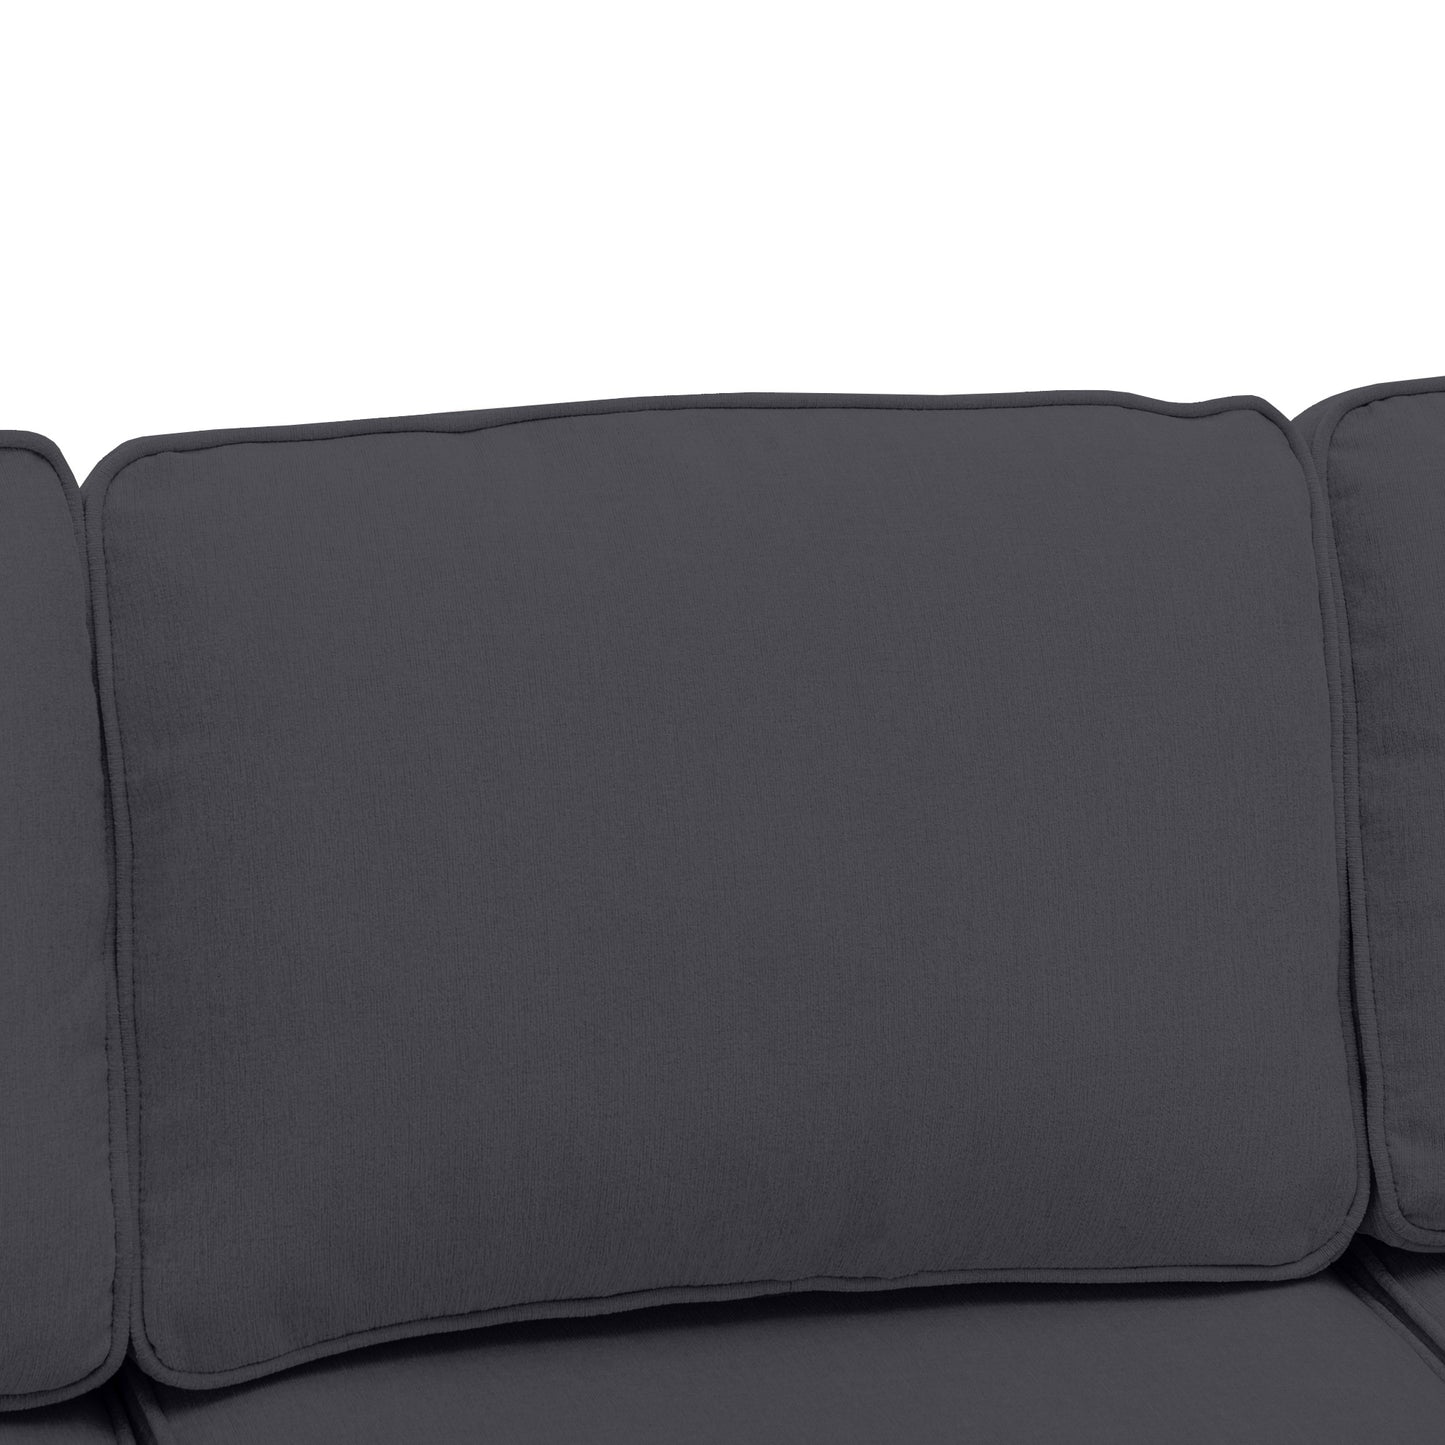 108.6 Customizable Fabric Upholstered Modular Sectional Sofa with Ottoman, Gray Living Room Couch